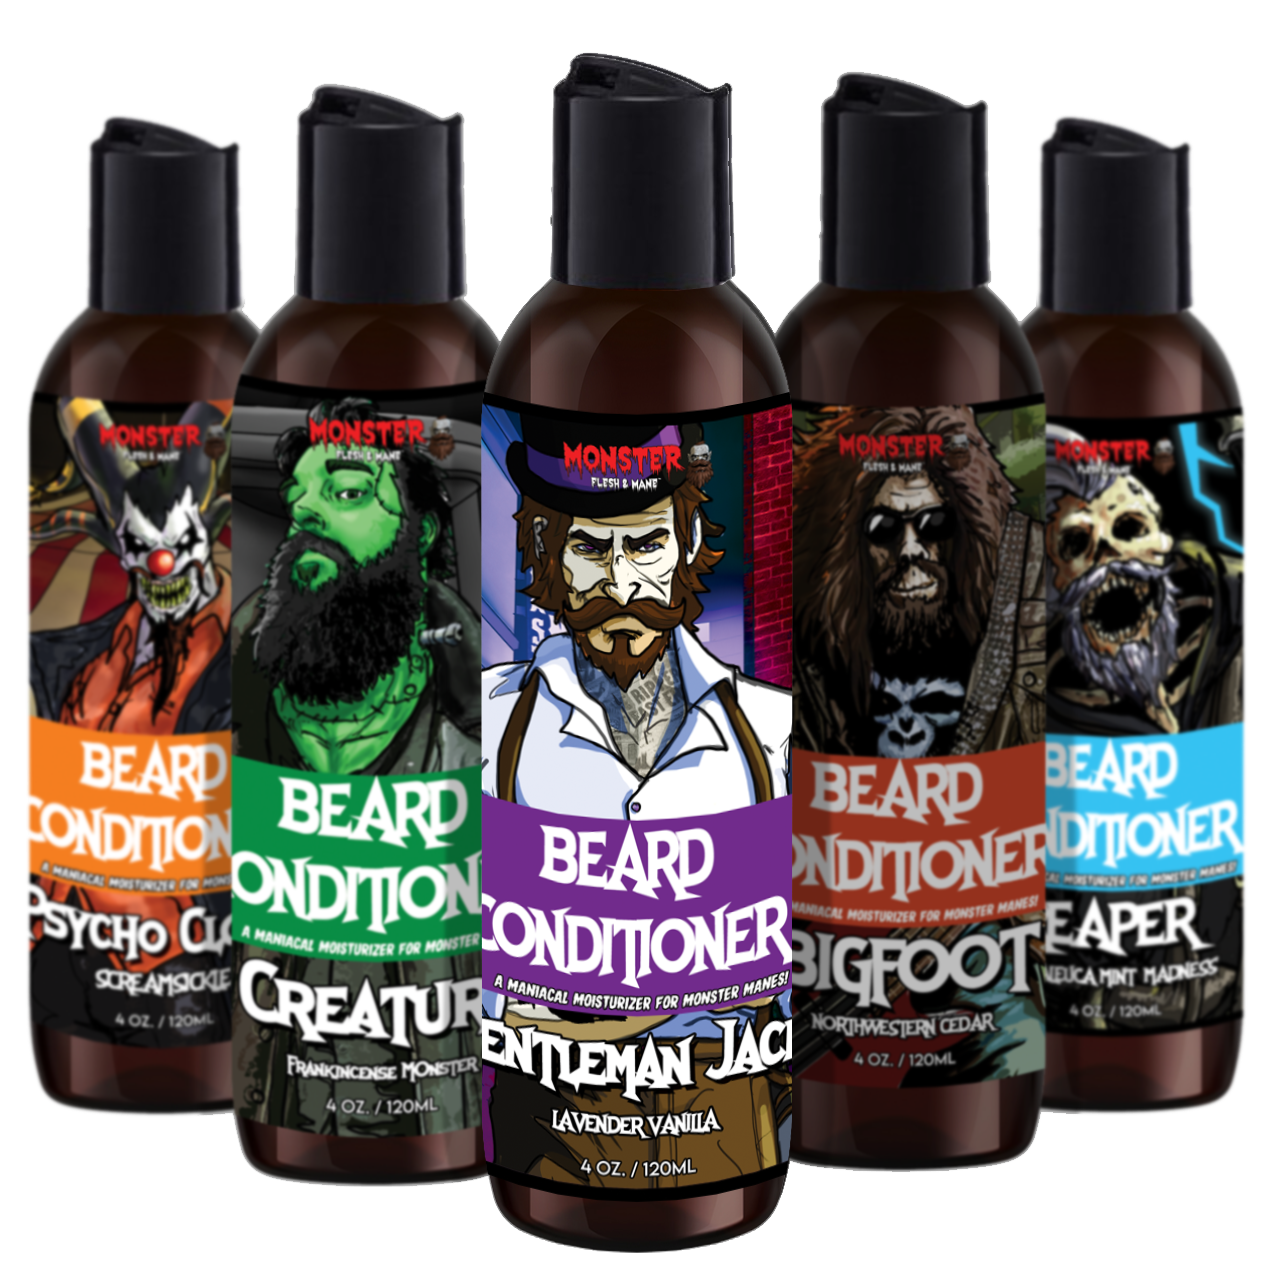 Beard Conditioner by MONSTER - Moisturizer and cream rinse for facial hair. 12 varities available, 5 pictured here in amber bottles.